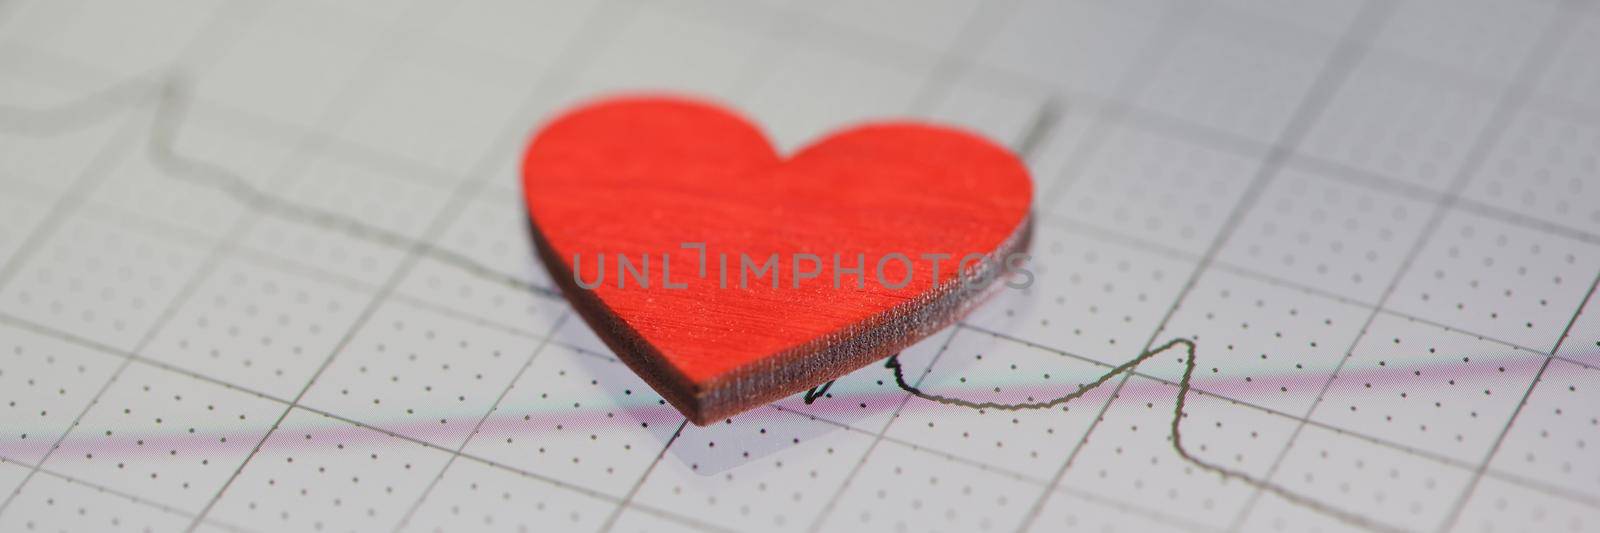 Toy red heart lying on paper with electrocardiogram closeup. ECG diagnostics of rhythm disturbances concept